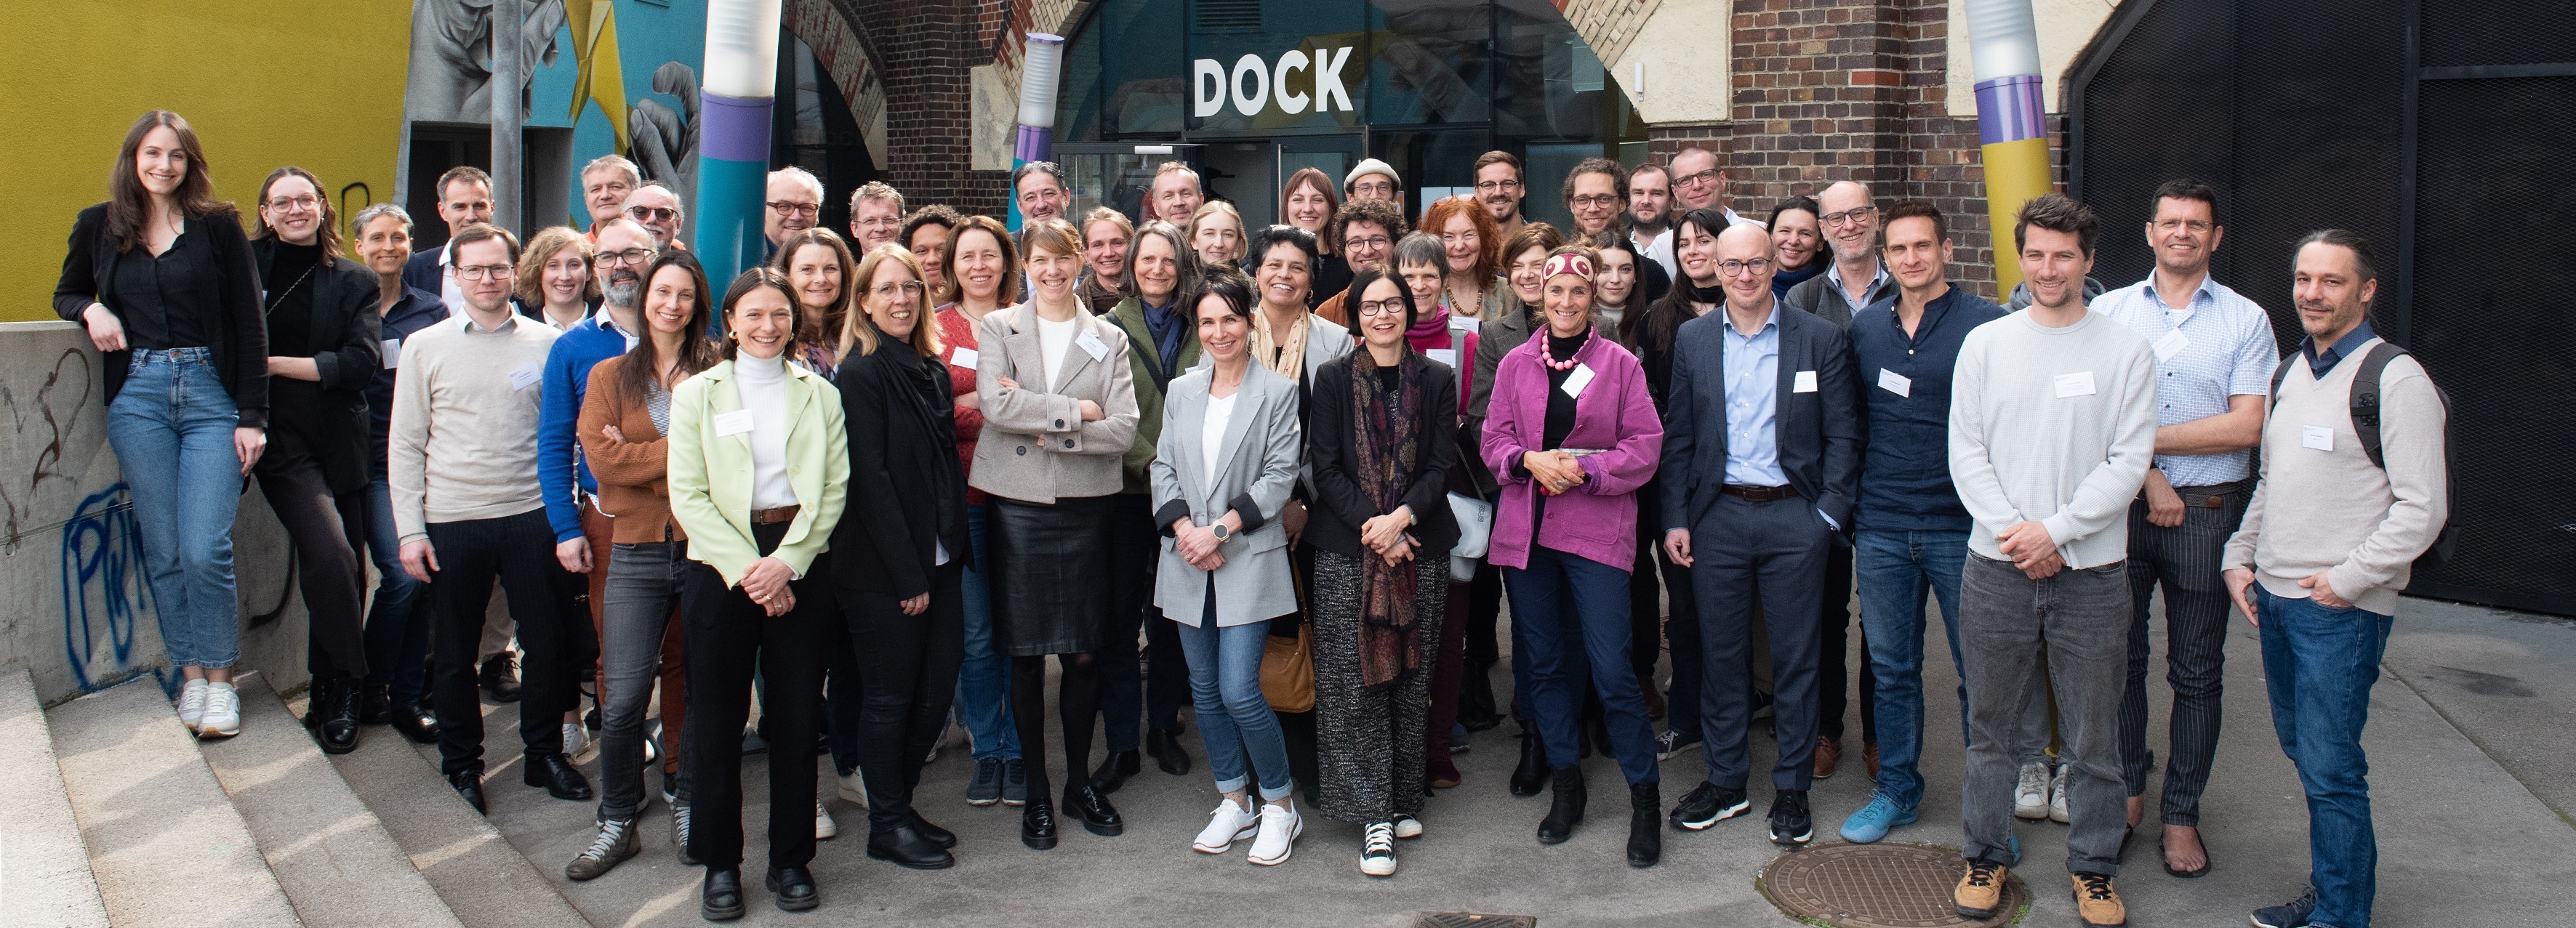 Members of the Sustainability Advisory Board in front of the DOCK.